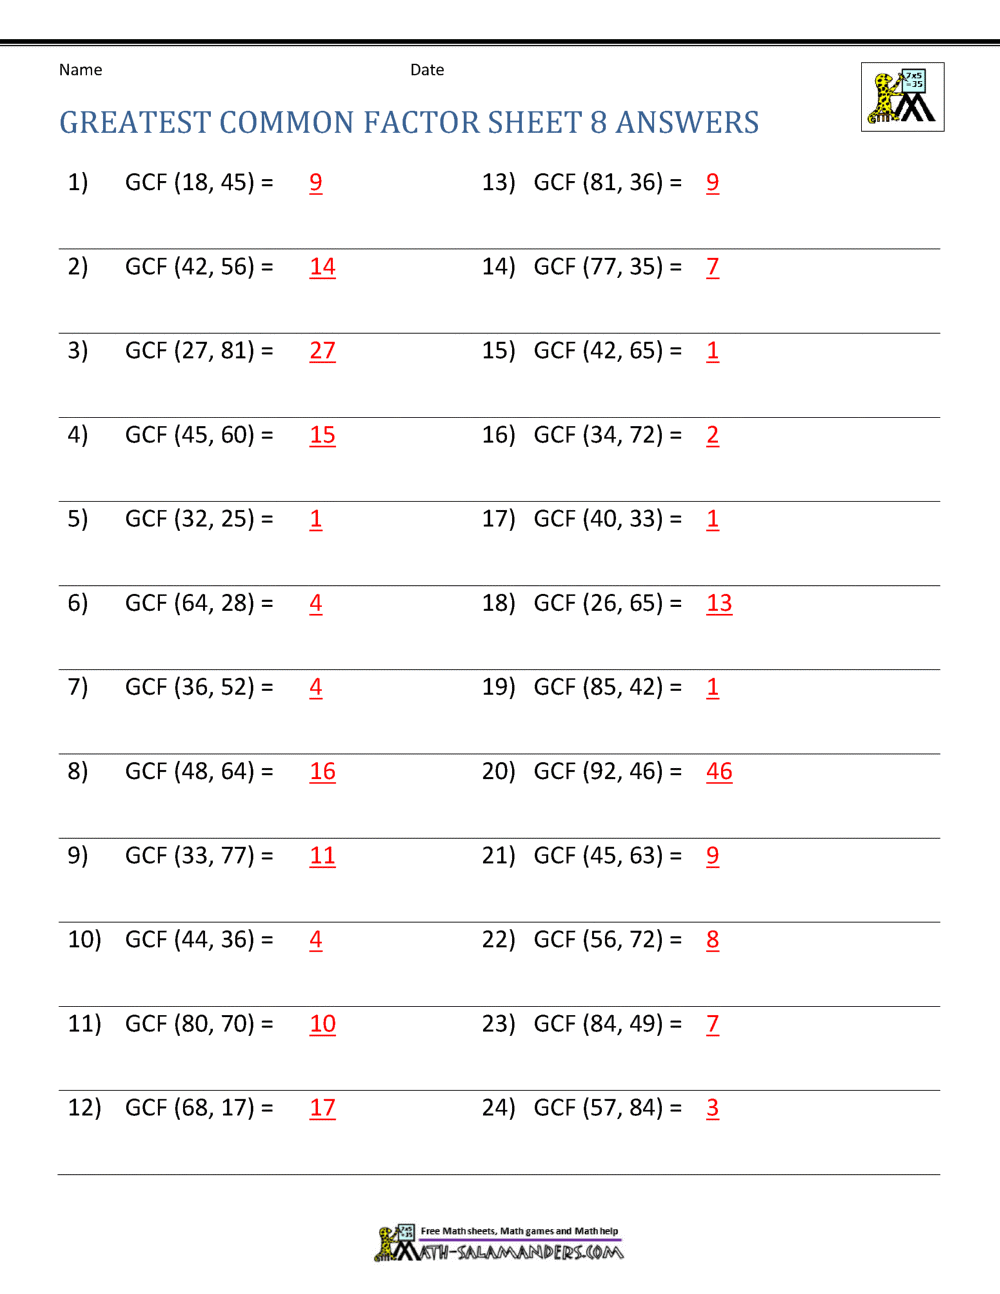 Finding The Greatest Common Factor Of Whole Numbers Worksheet Answers